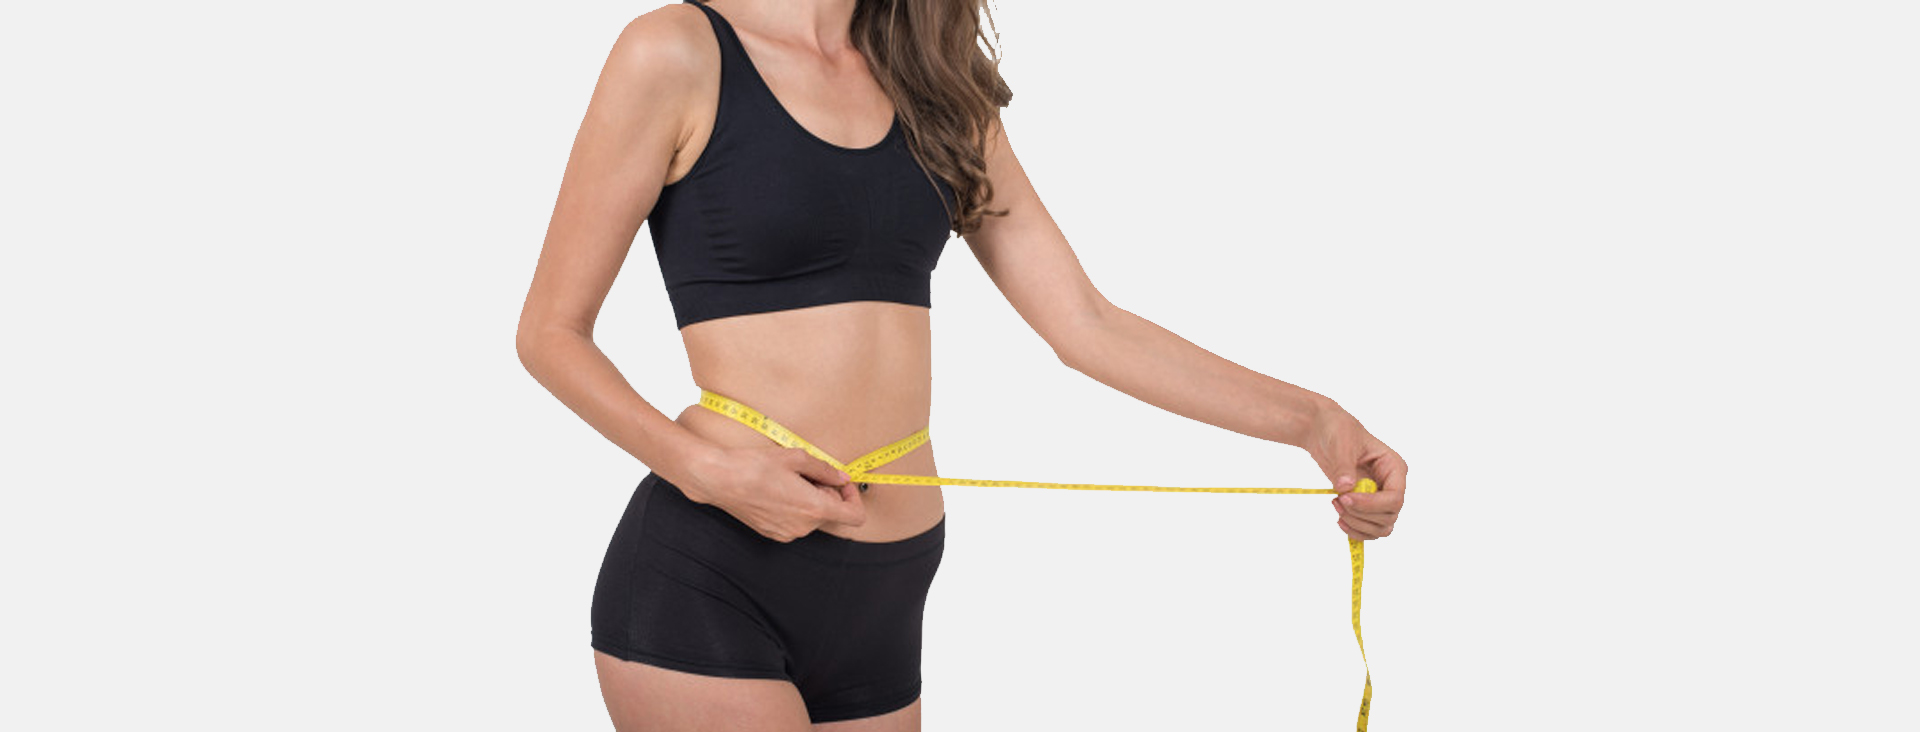 How to Make Your Waist Smaller?